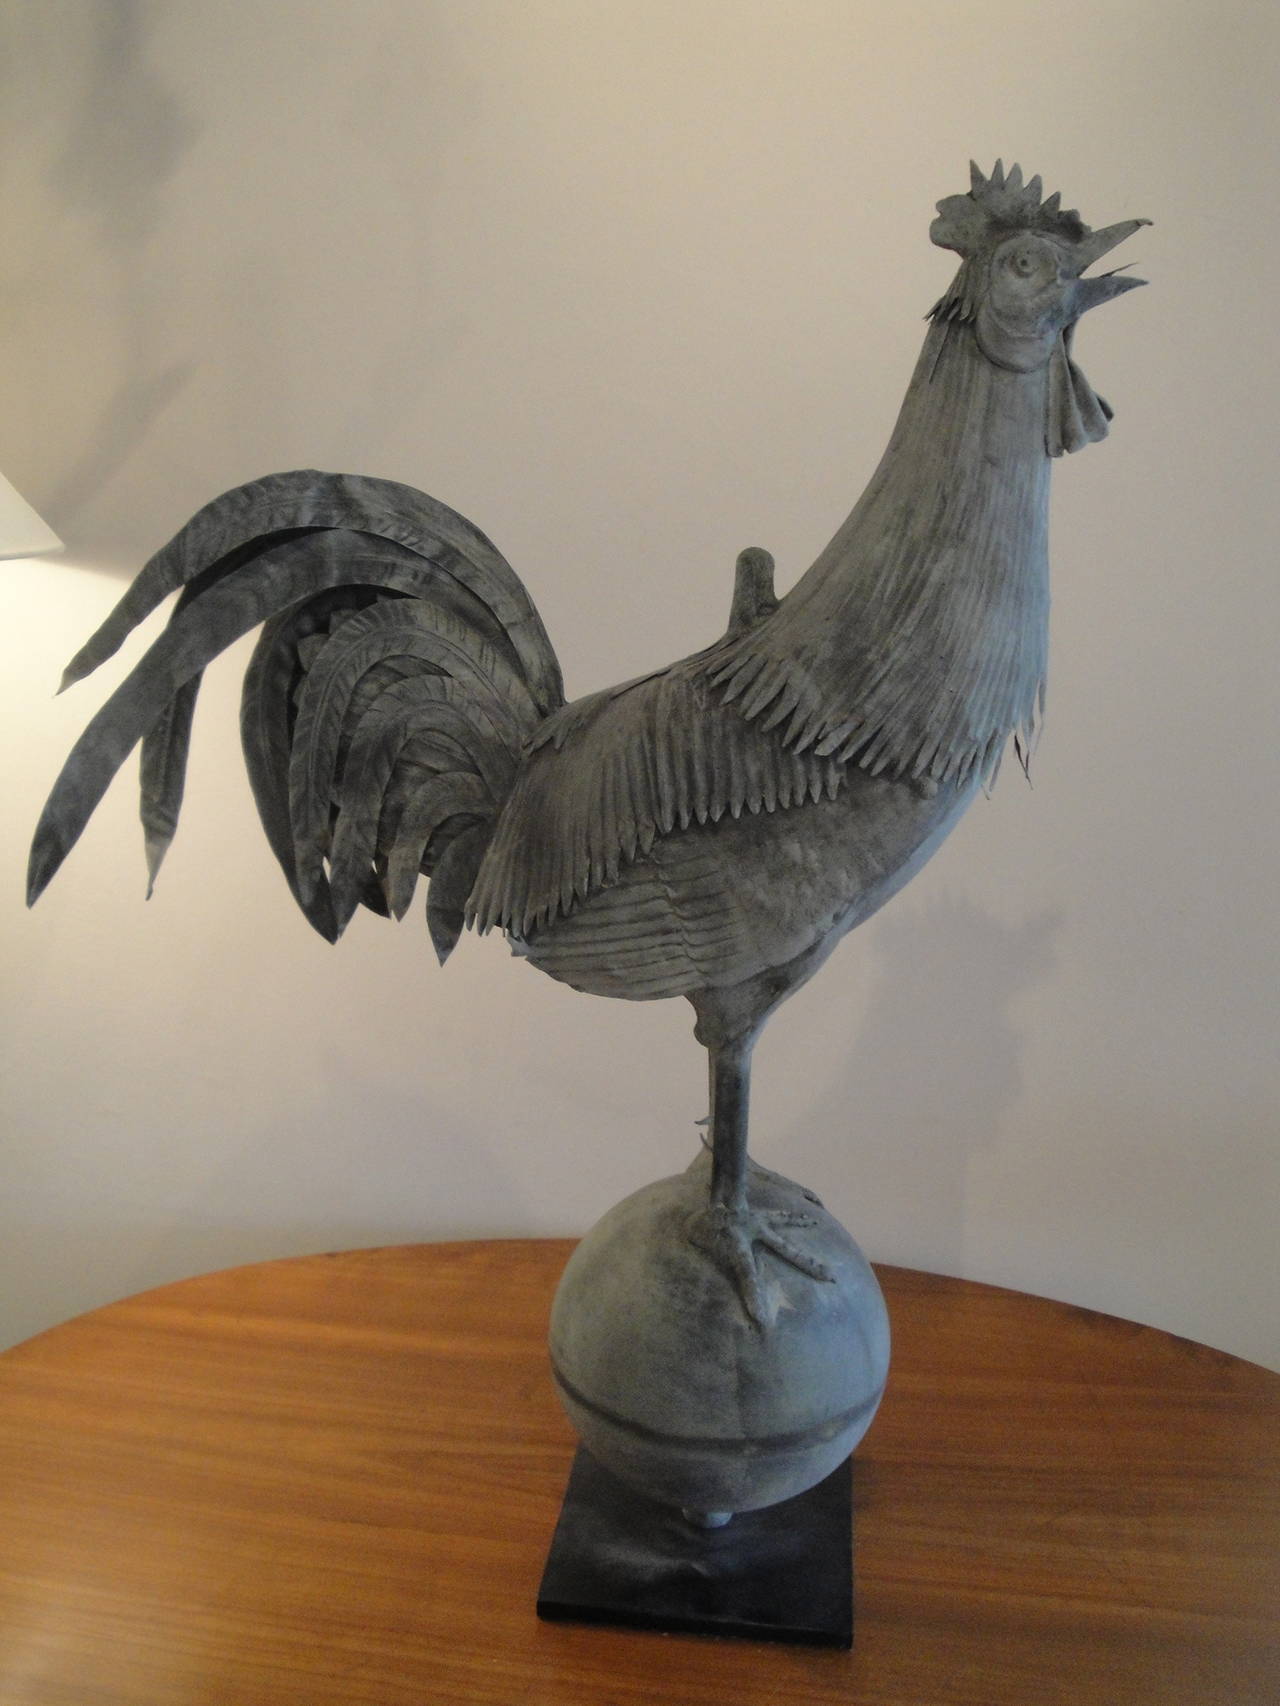 19th century French cock weathervane in zinc with finely cut details.